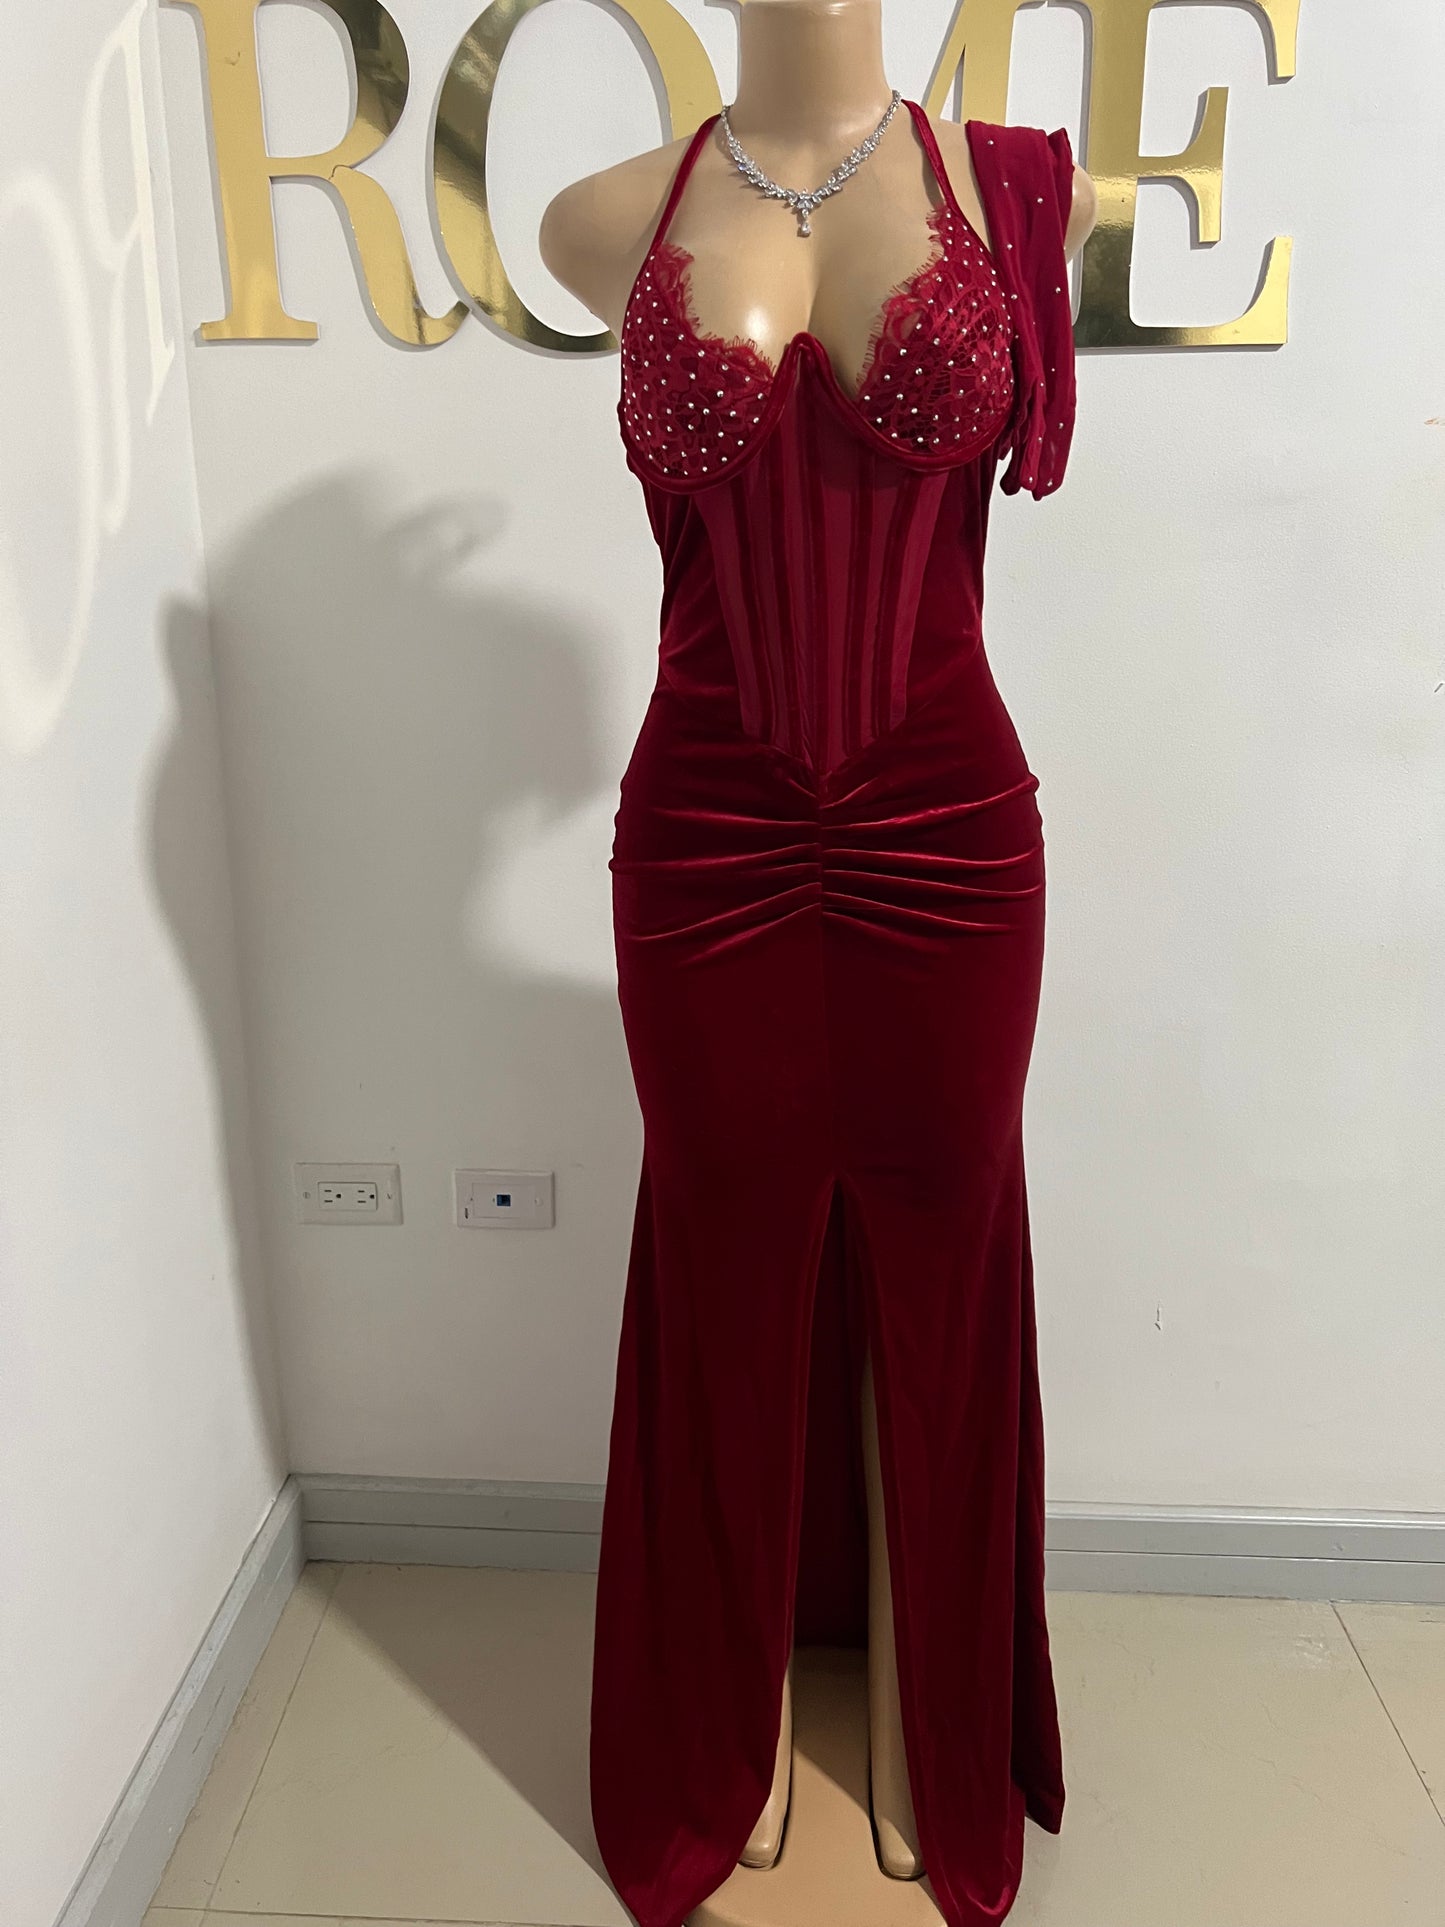 Ophelia Crystal Dress with Gloves (Burgundy)